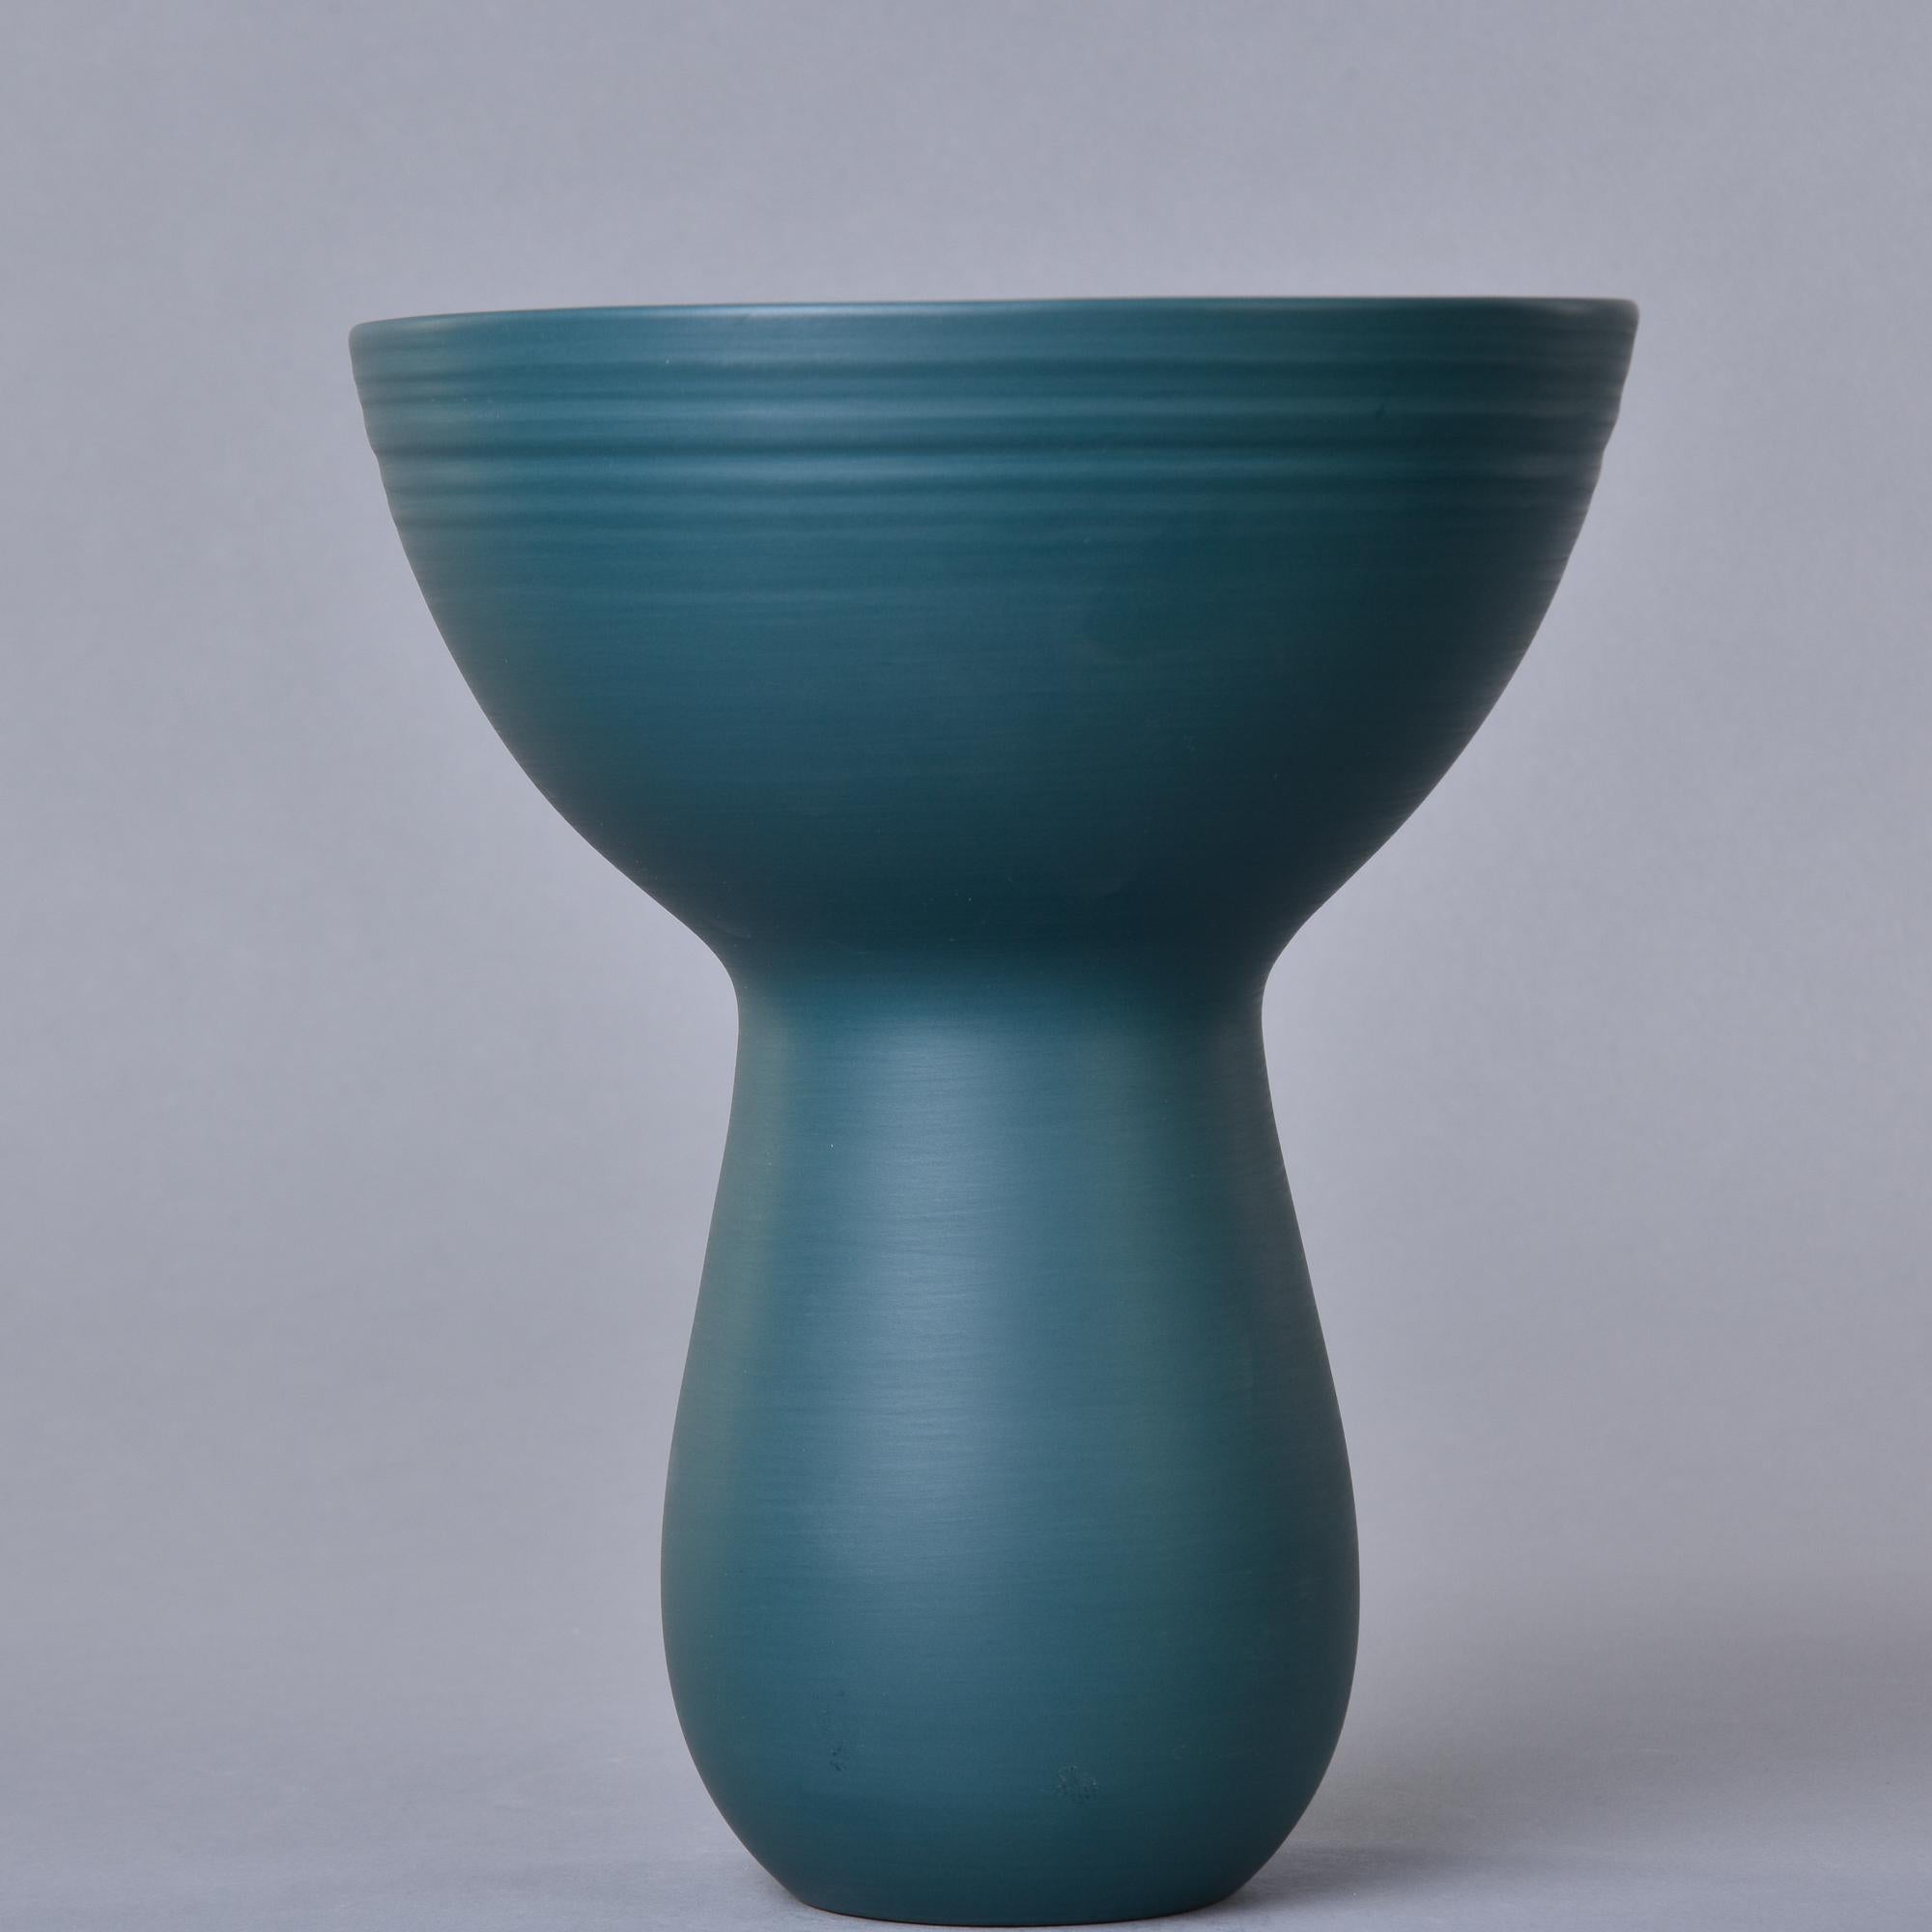 Rina Menardi Bouquet Vase in Teal Green Glaze In New Condition For Sale In Troy, MI